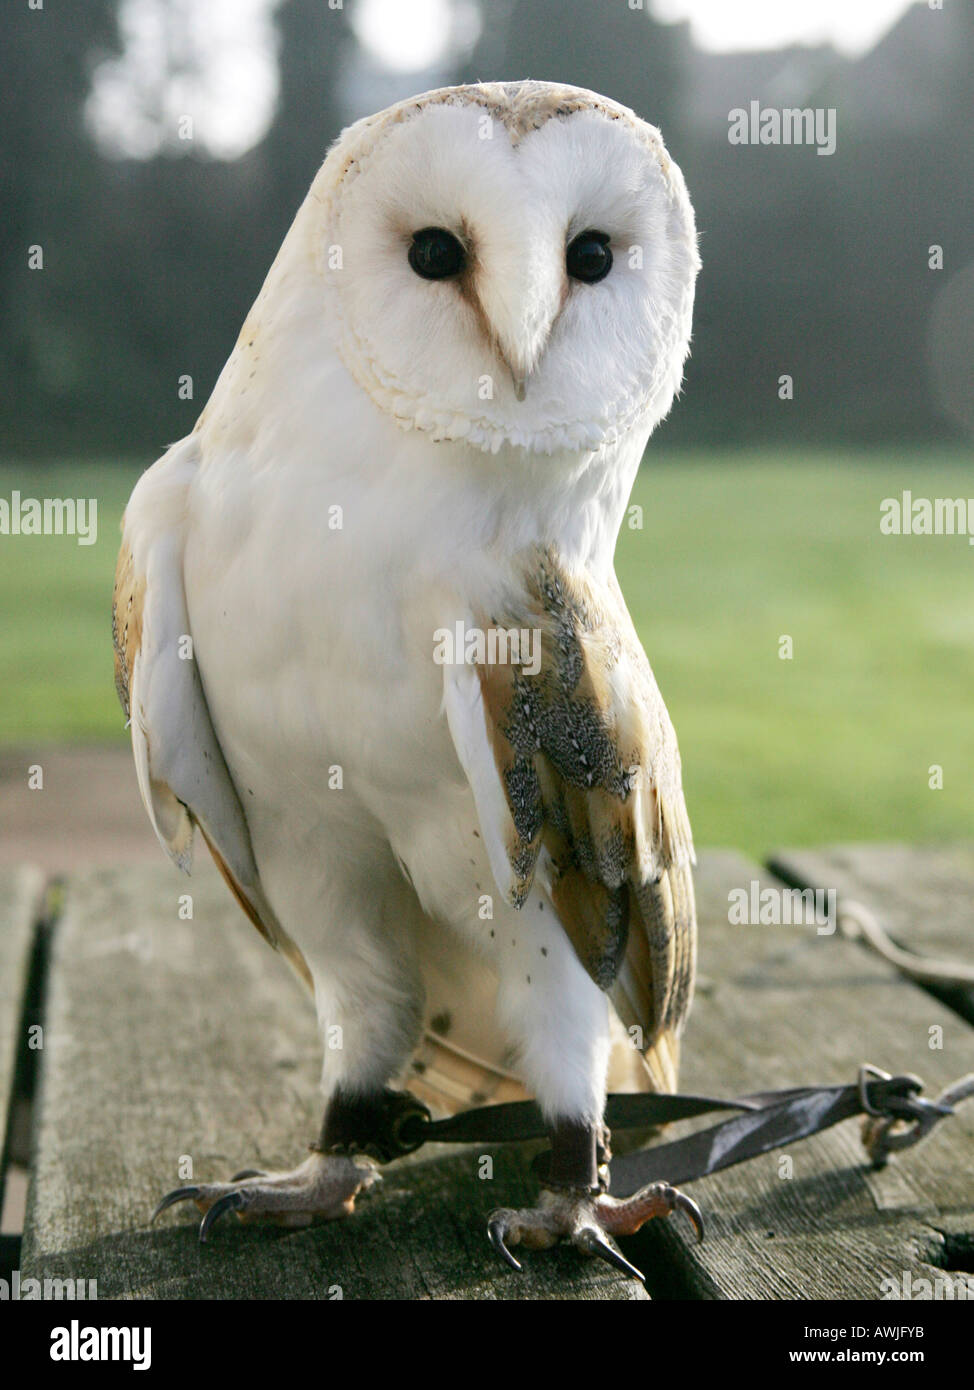 A snowy owl standing looking at the camera. Stock Photo